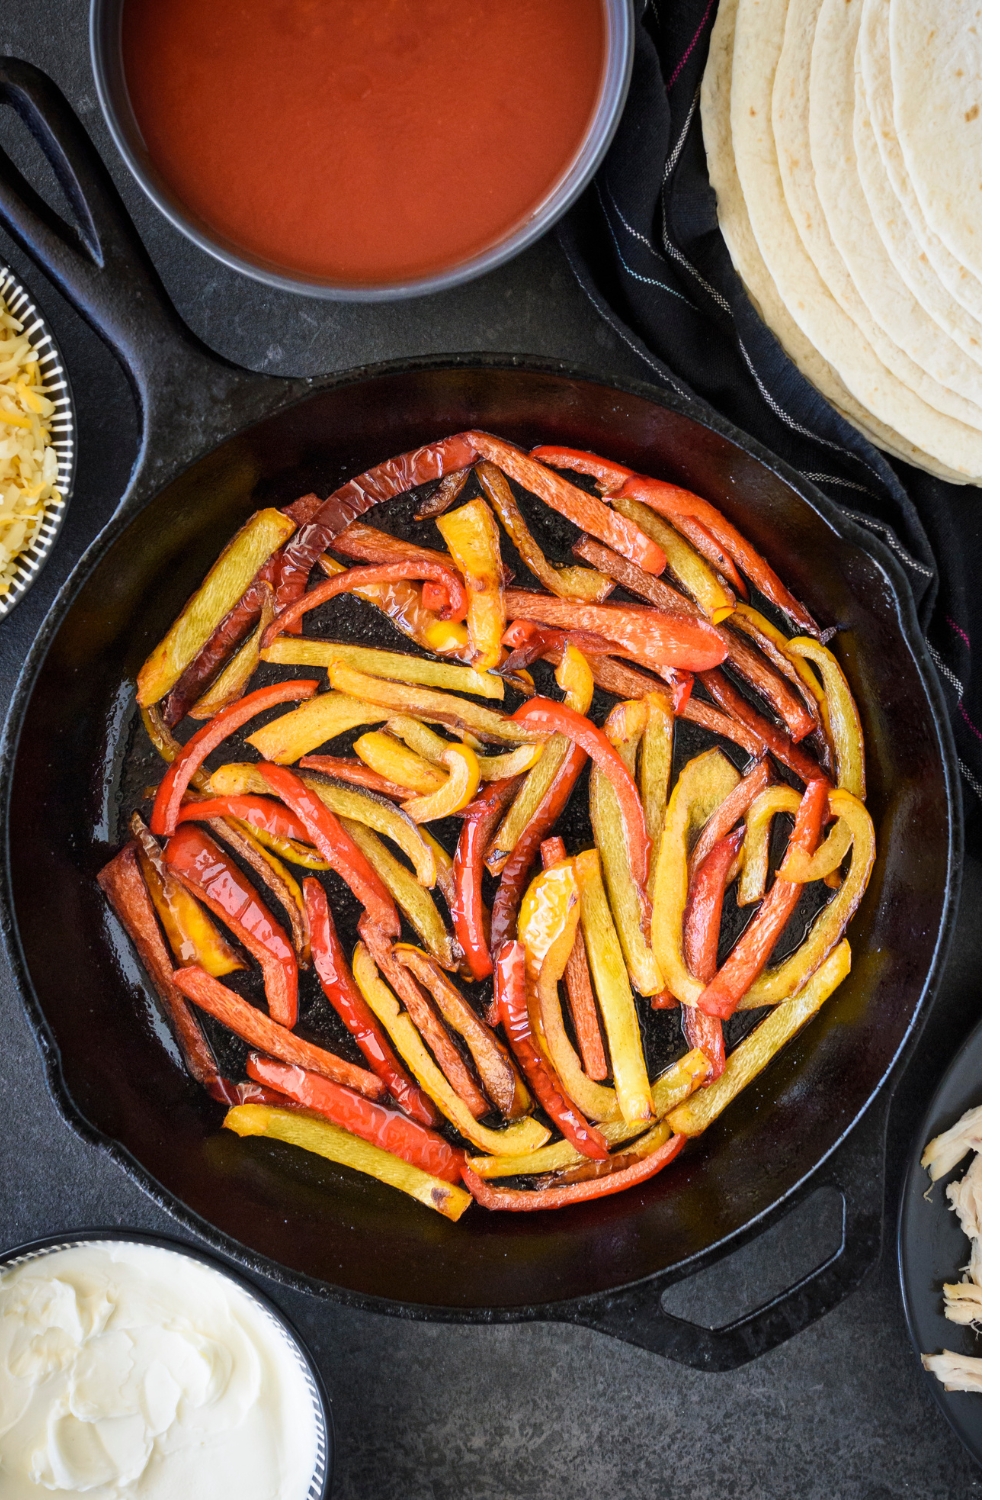 A black cast iron skillet filled with yellow and red bell peppers being sautéed.